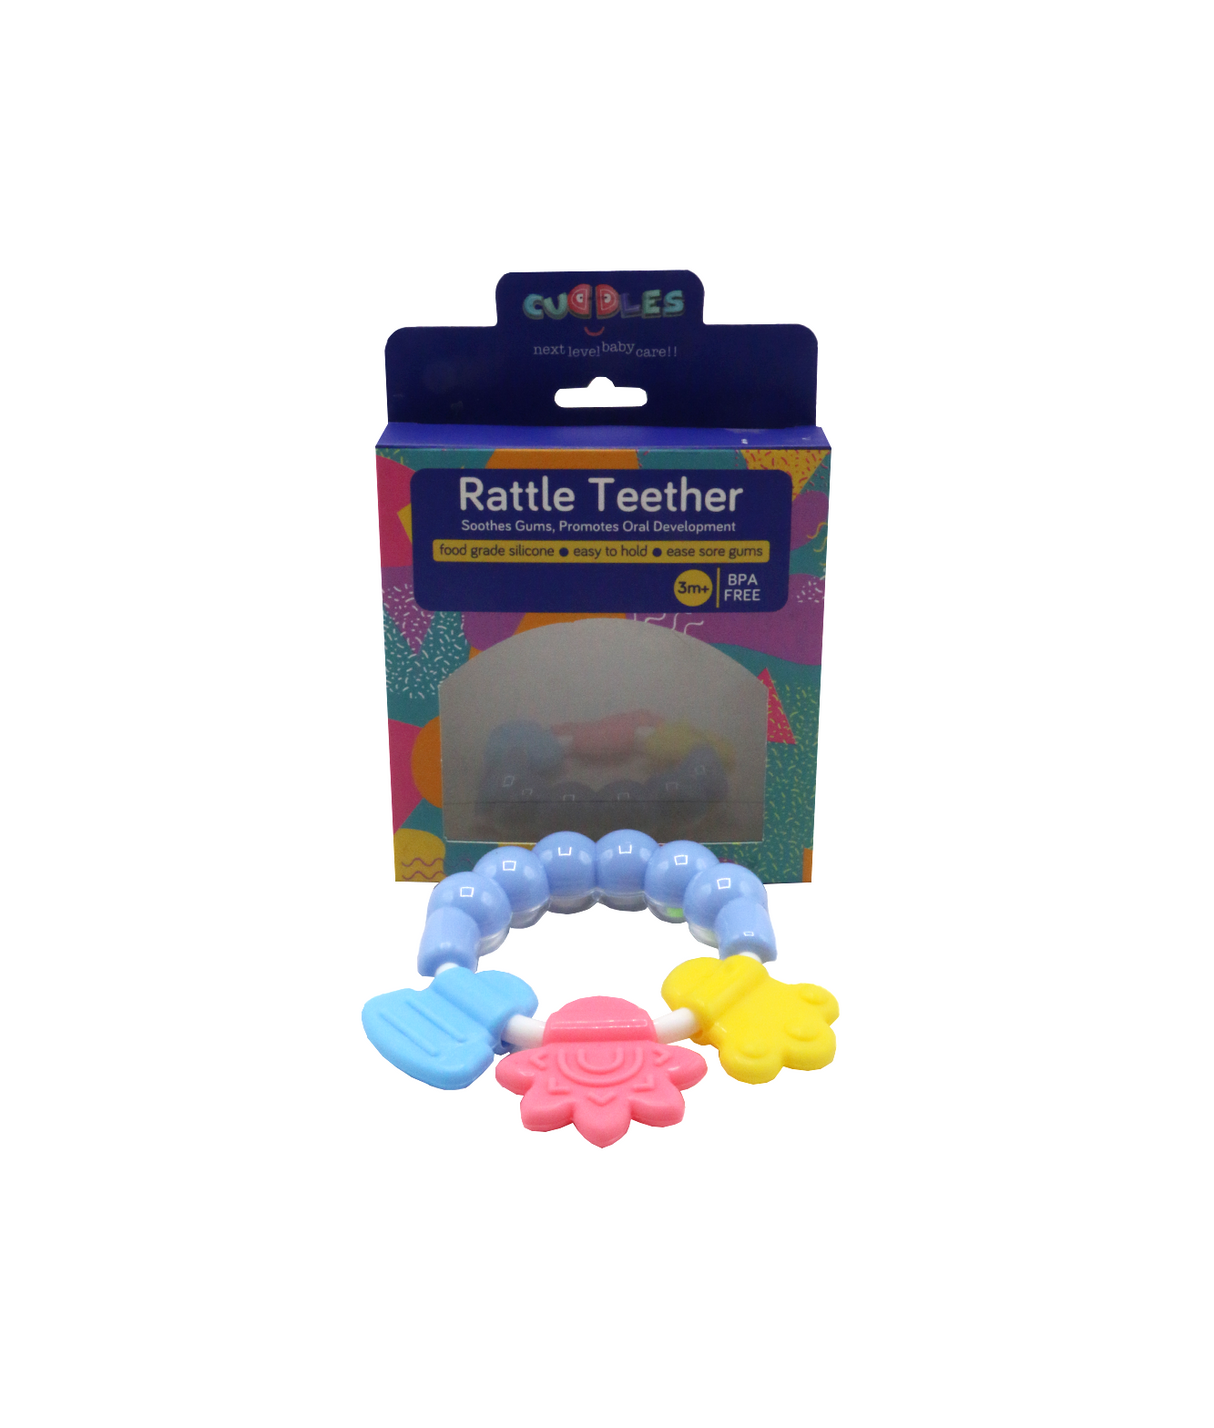 cuddles rattle teether